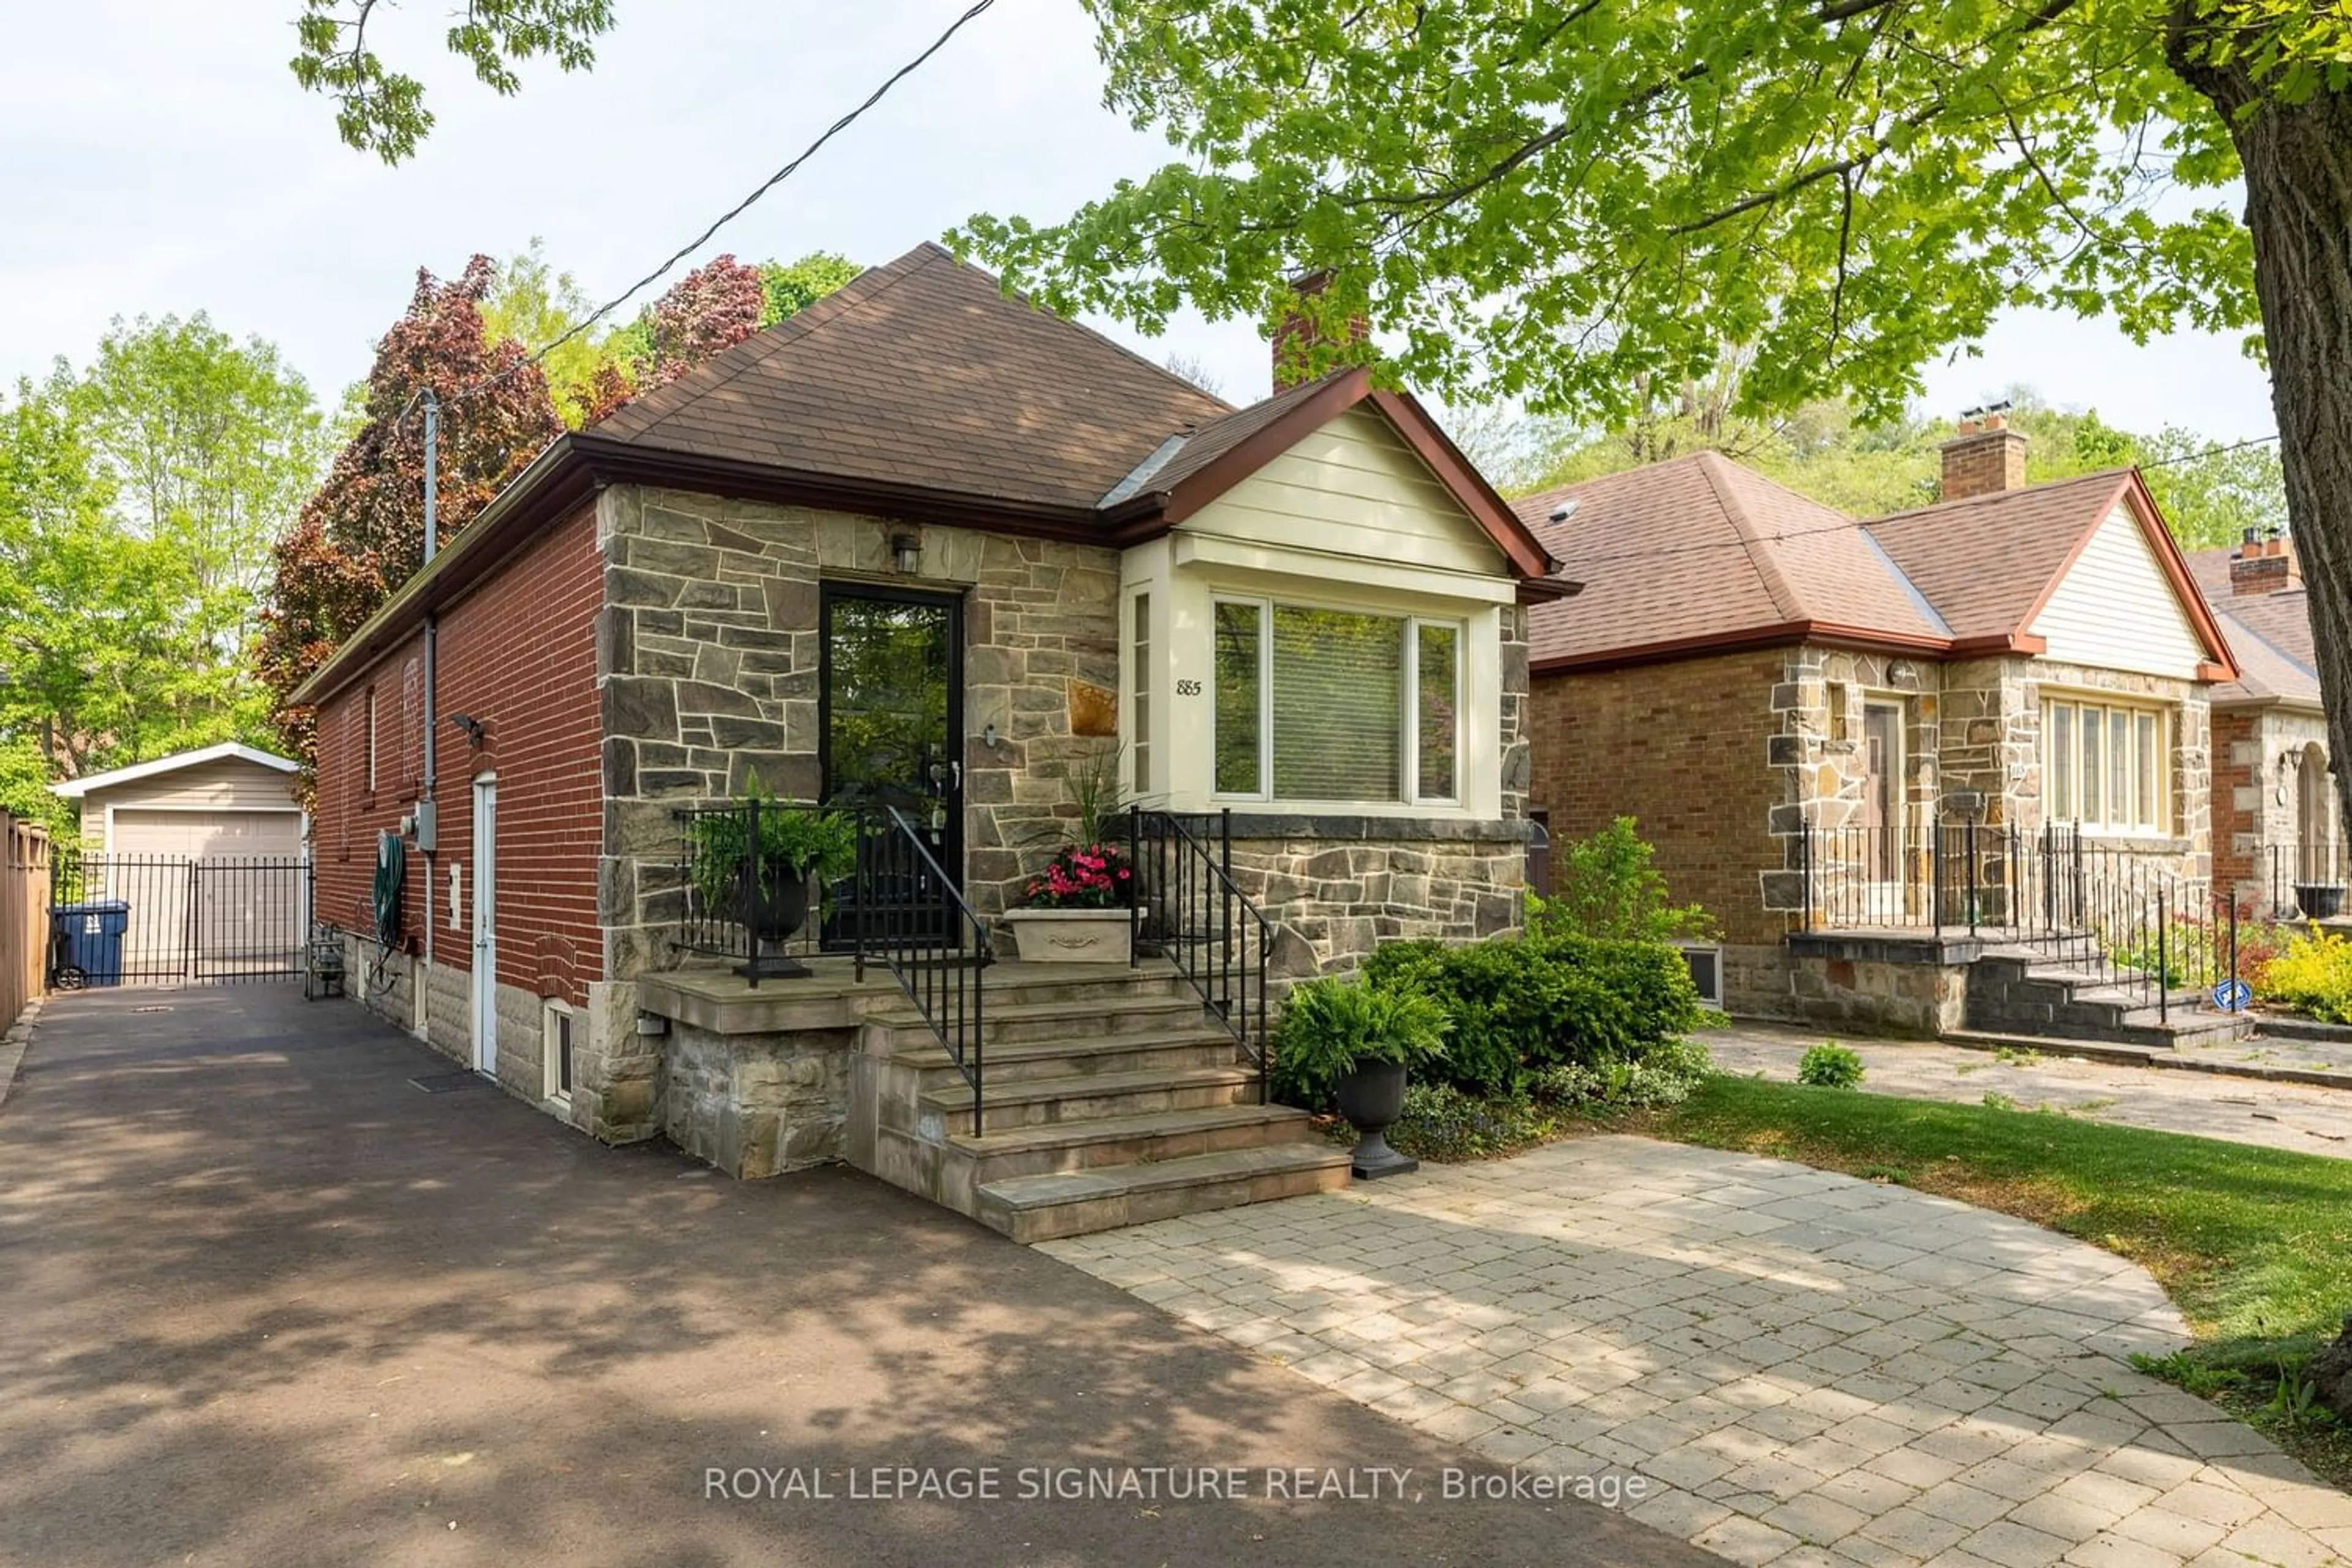 Home with brick exterior material for 885 Royal York Rd, Toronto Ontario M8Y 2V5